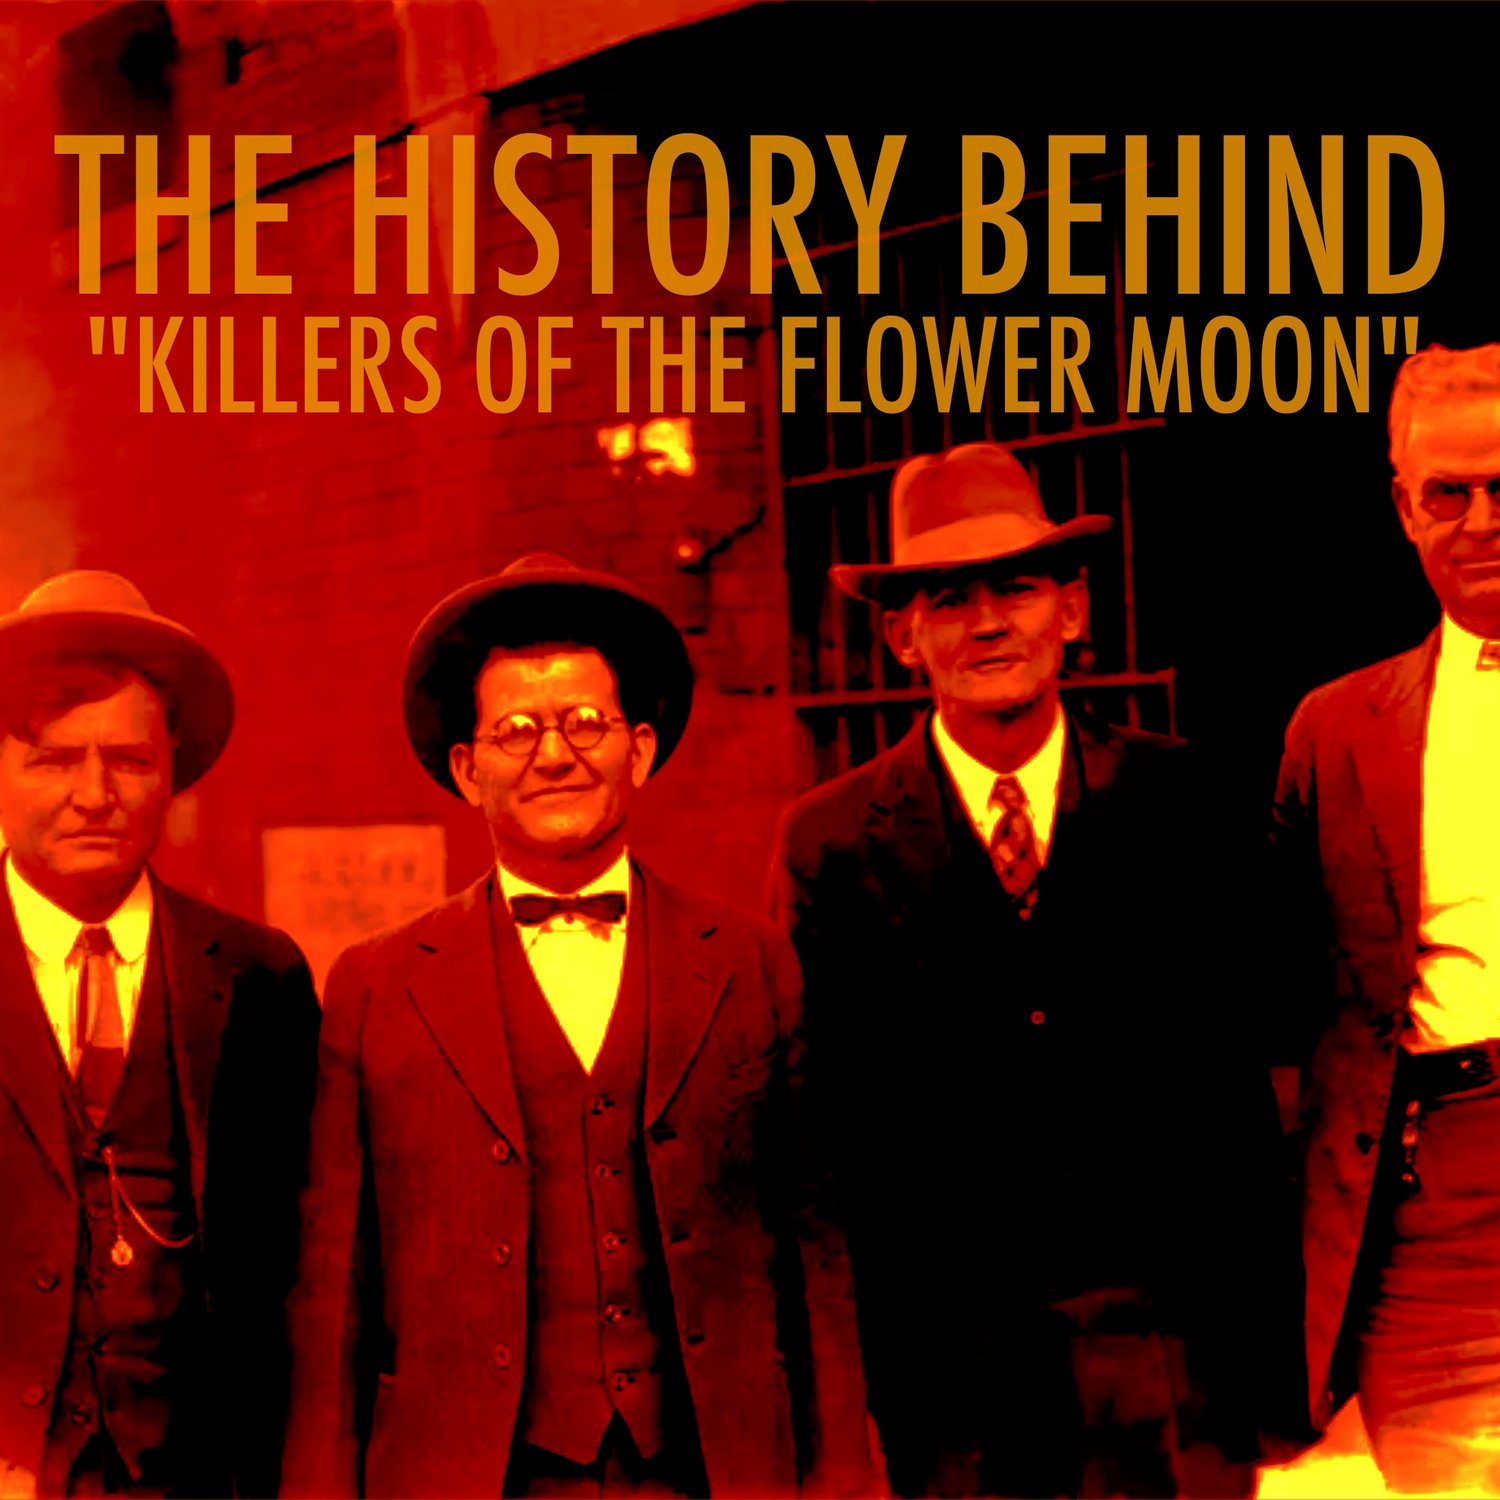 EPISODE 101: The History Behind Killers of the Flower Moon